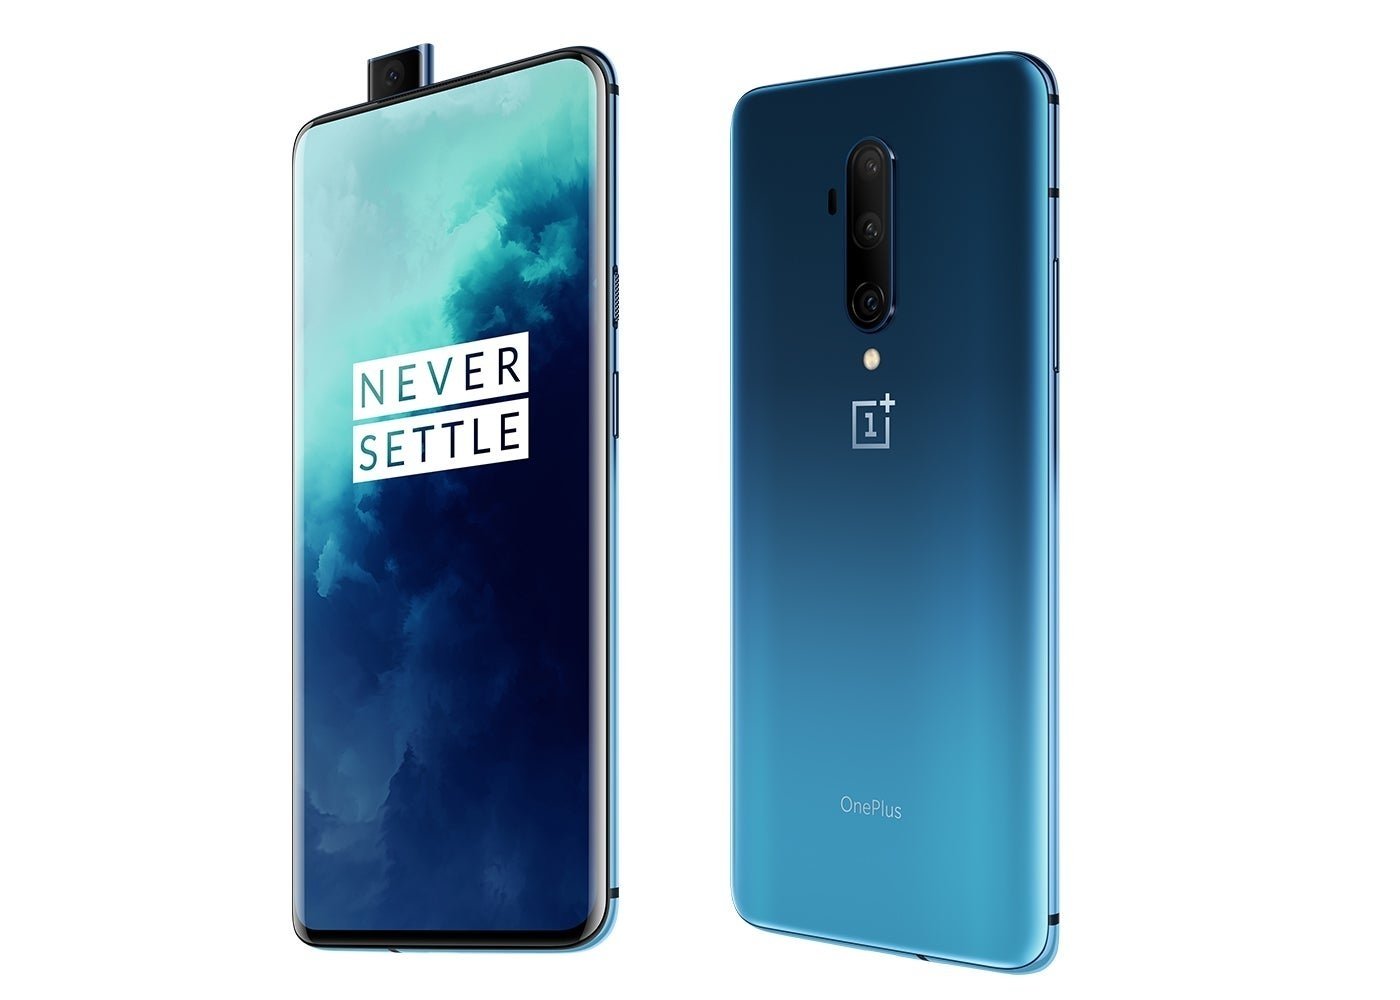 OnePlus 7T Pro, frontal y trasera